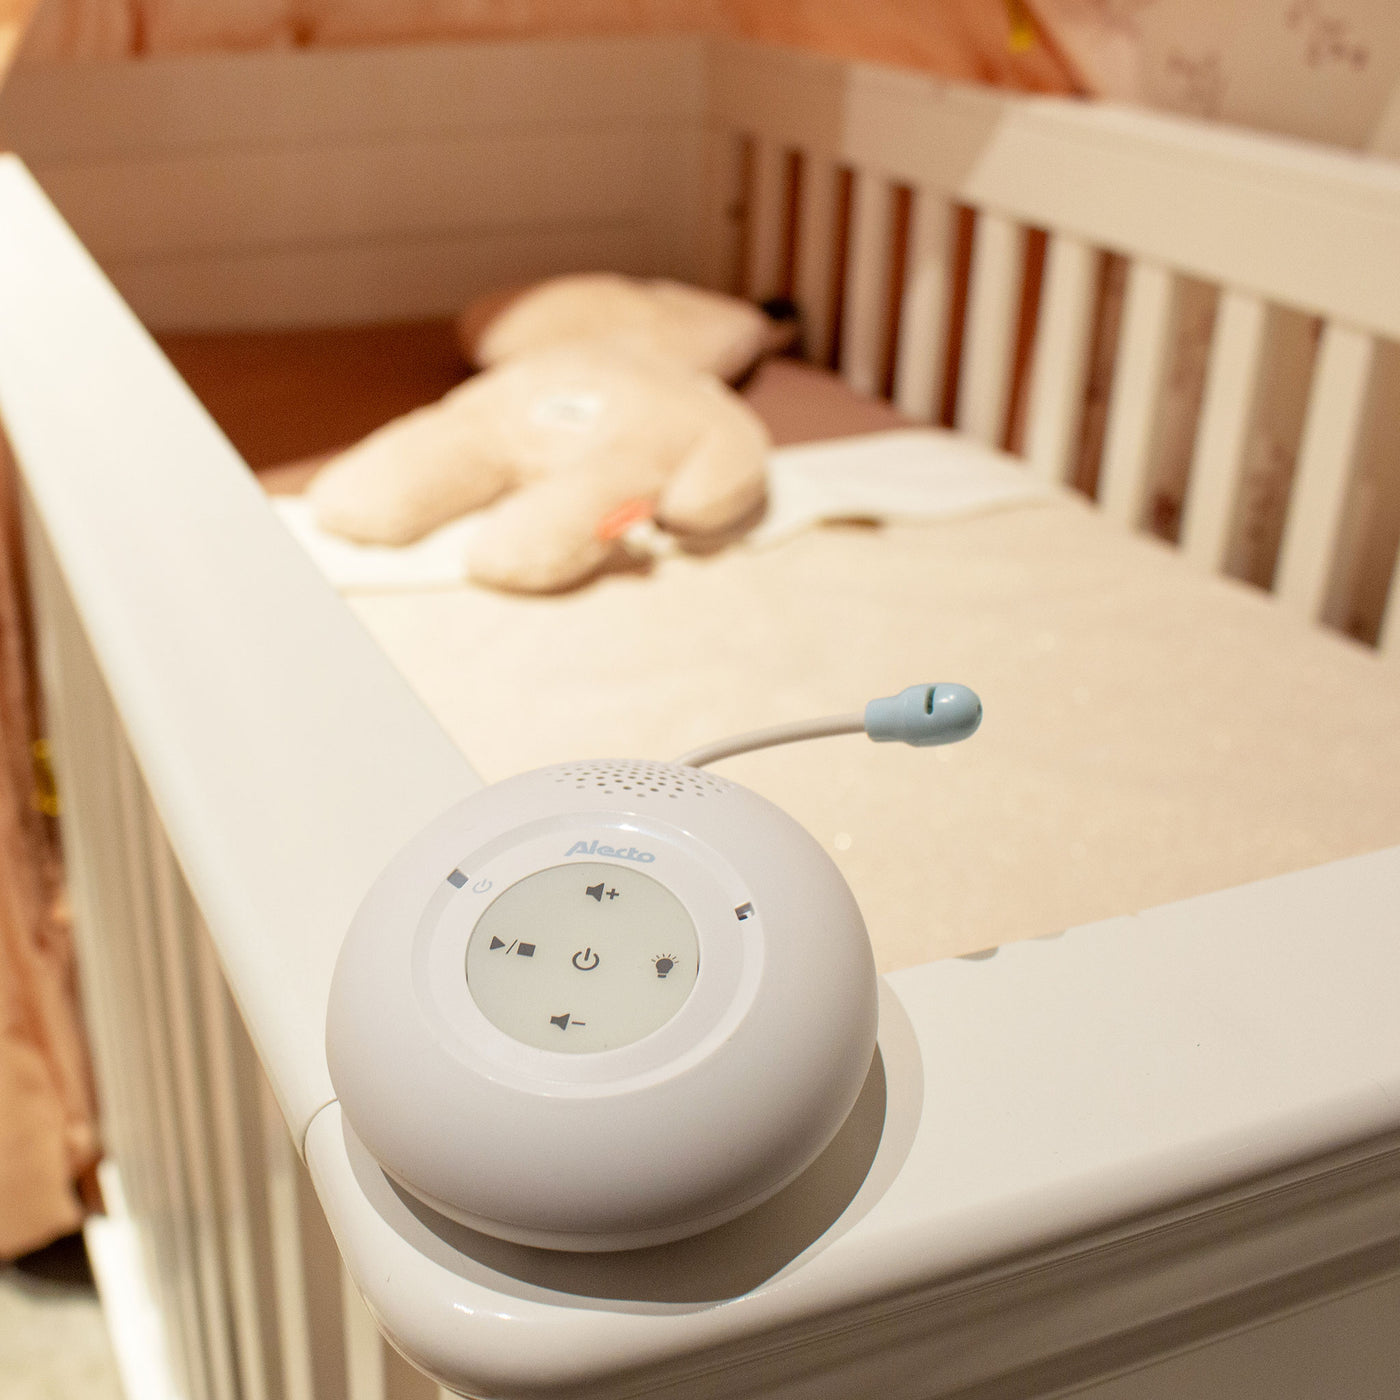 Alecto DBX-112 - Full Eco DECT baby monitor, white/blue